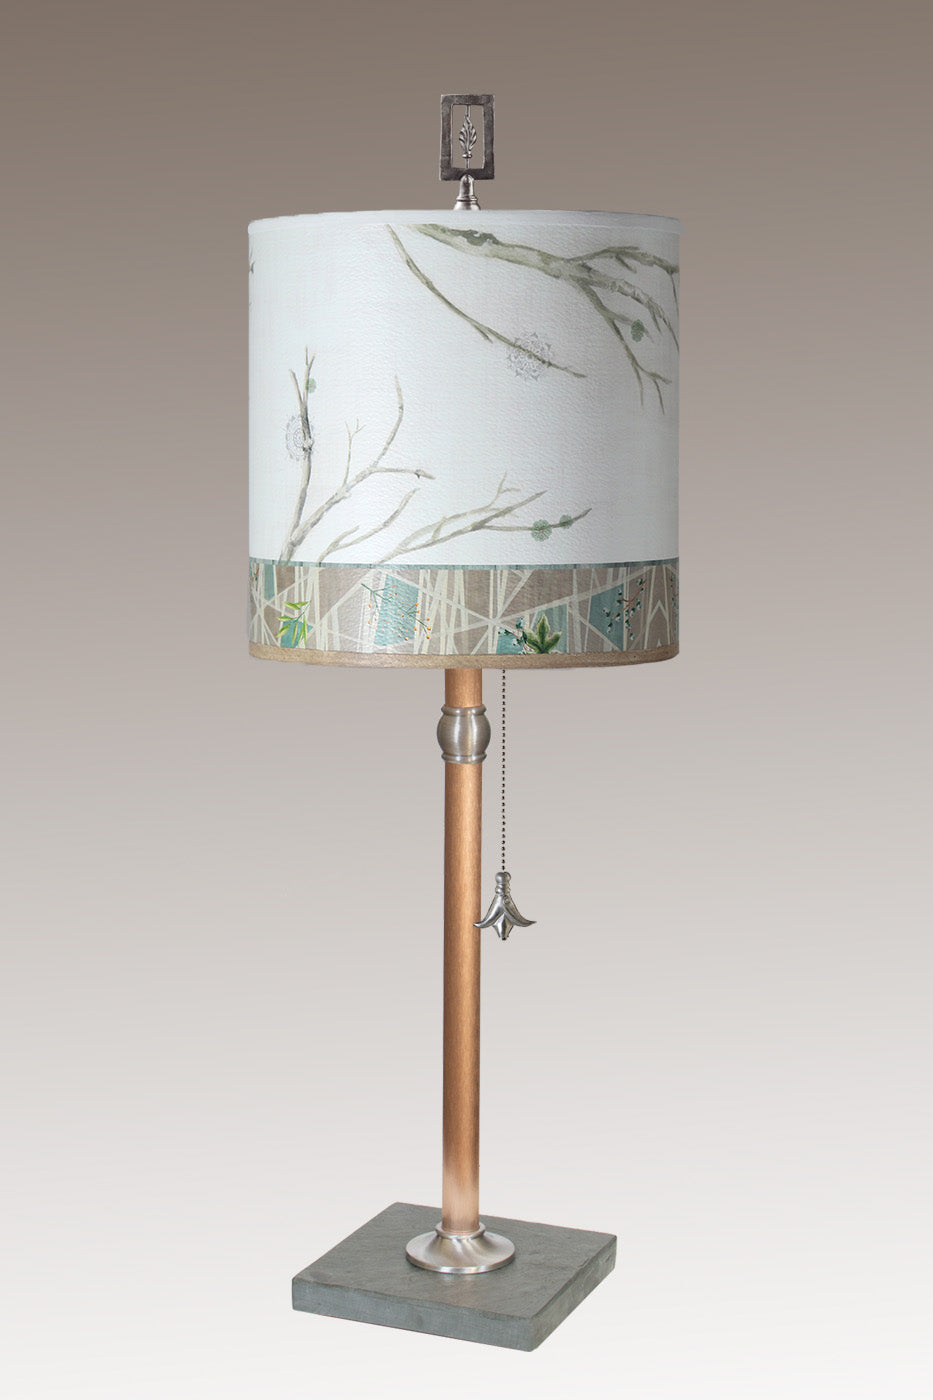 Copper Table Lamp with Medium Drum Shade in Prism Branch